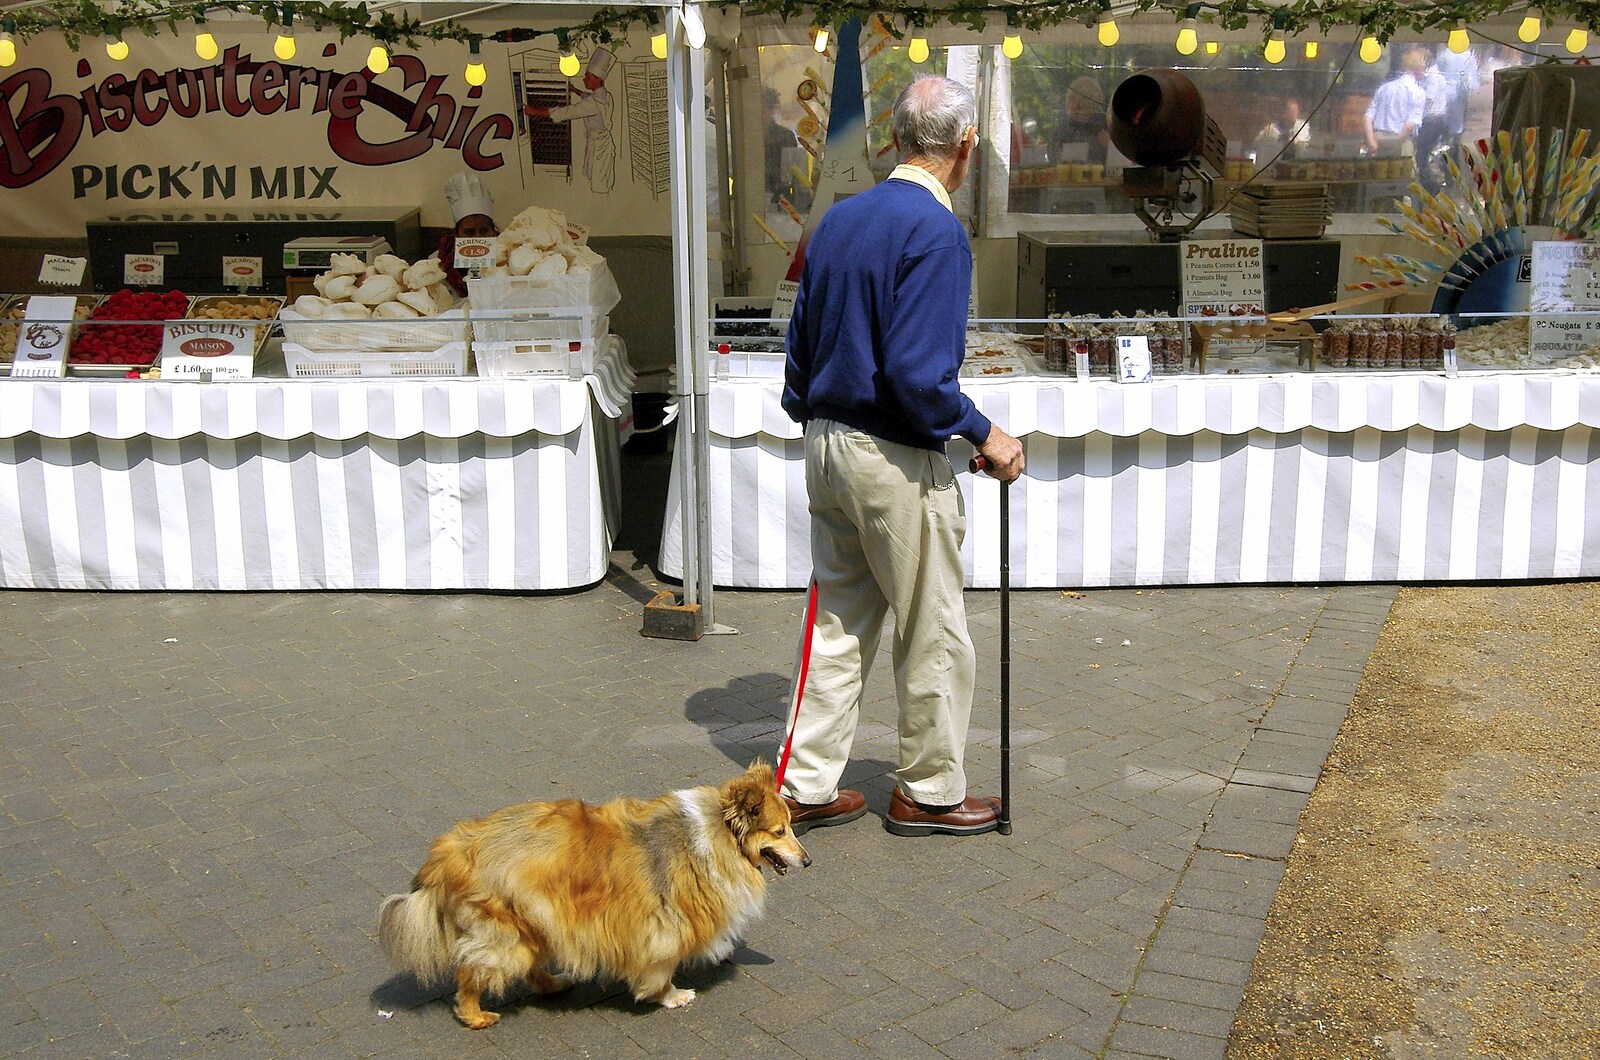 An old man walks past with his dog from A French Market Visits, Diss, Norfolk - 24th June 2006